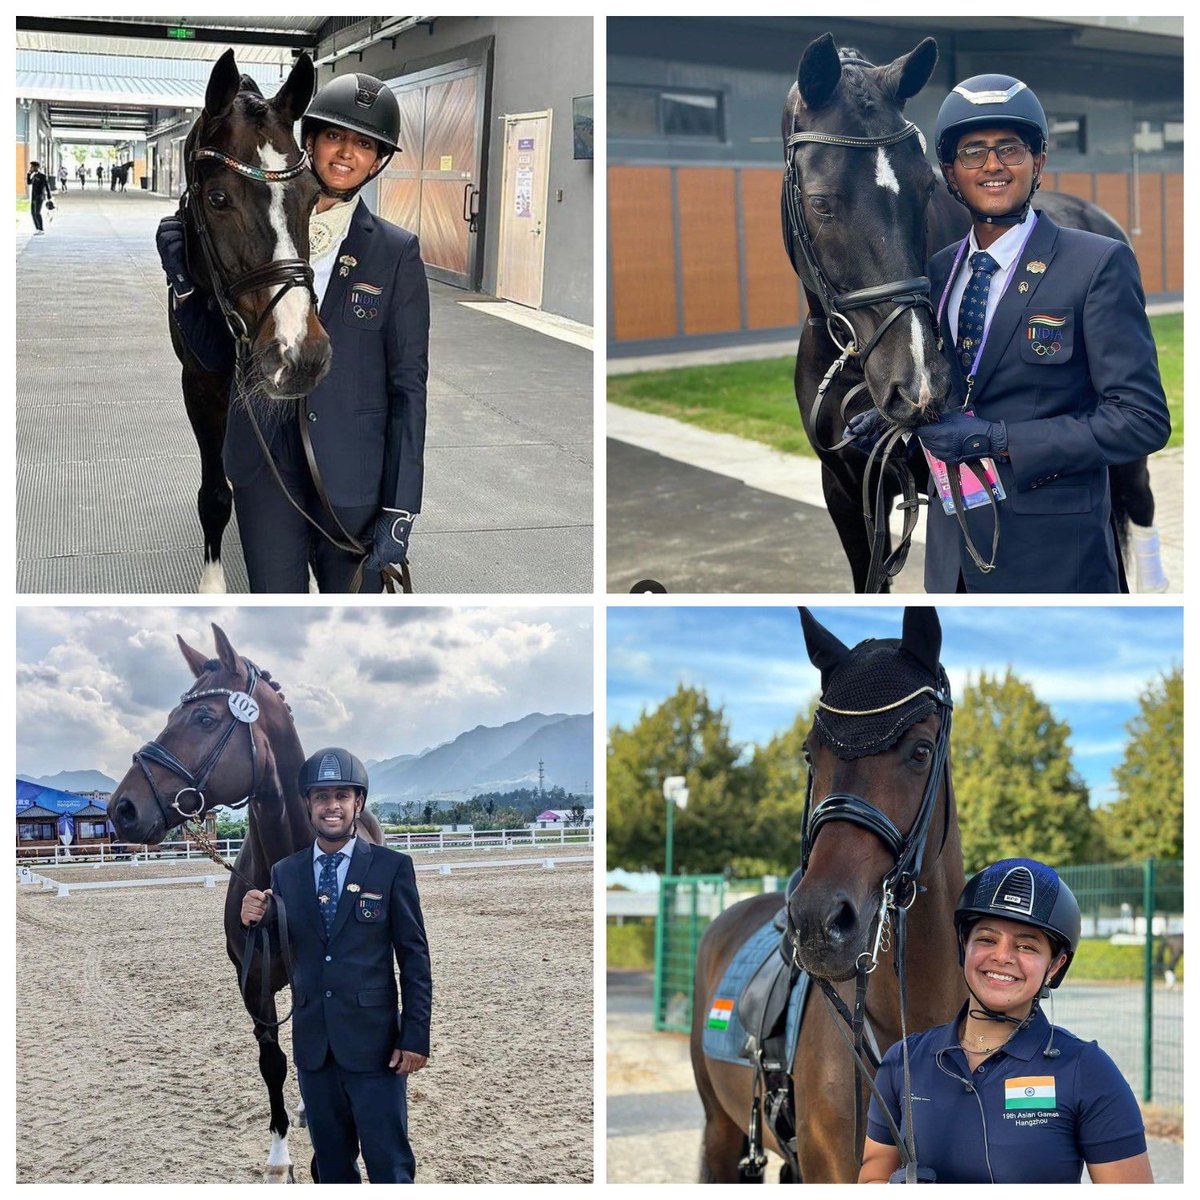 It is a matter of extreme pride that after several decades, our Equestrian Dressage Team has won Gold in Asian Games!

Hriday Chheda, Anush Agarwalla, Sudipti Hajela and Divyakriit Singh have displayed unparalleled skill, teamwork and brought honour to our nation on the